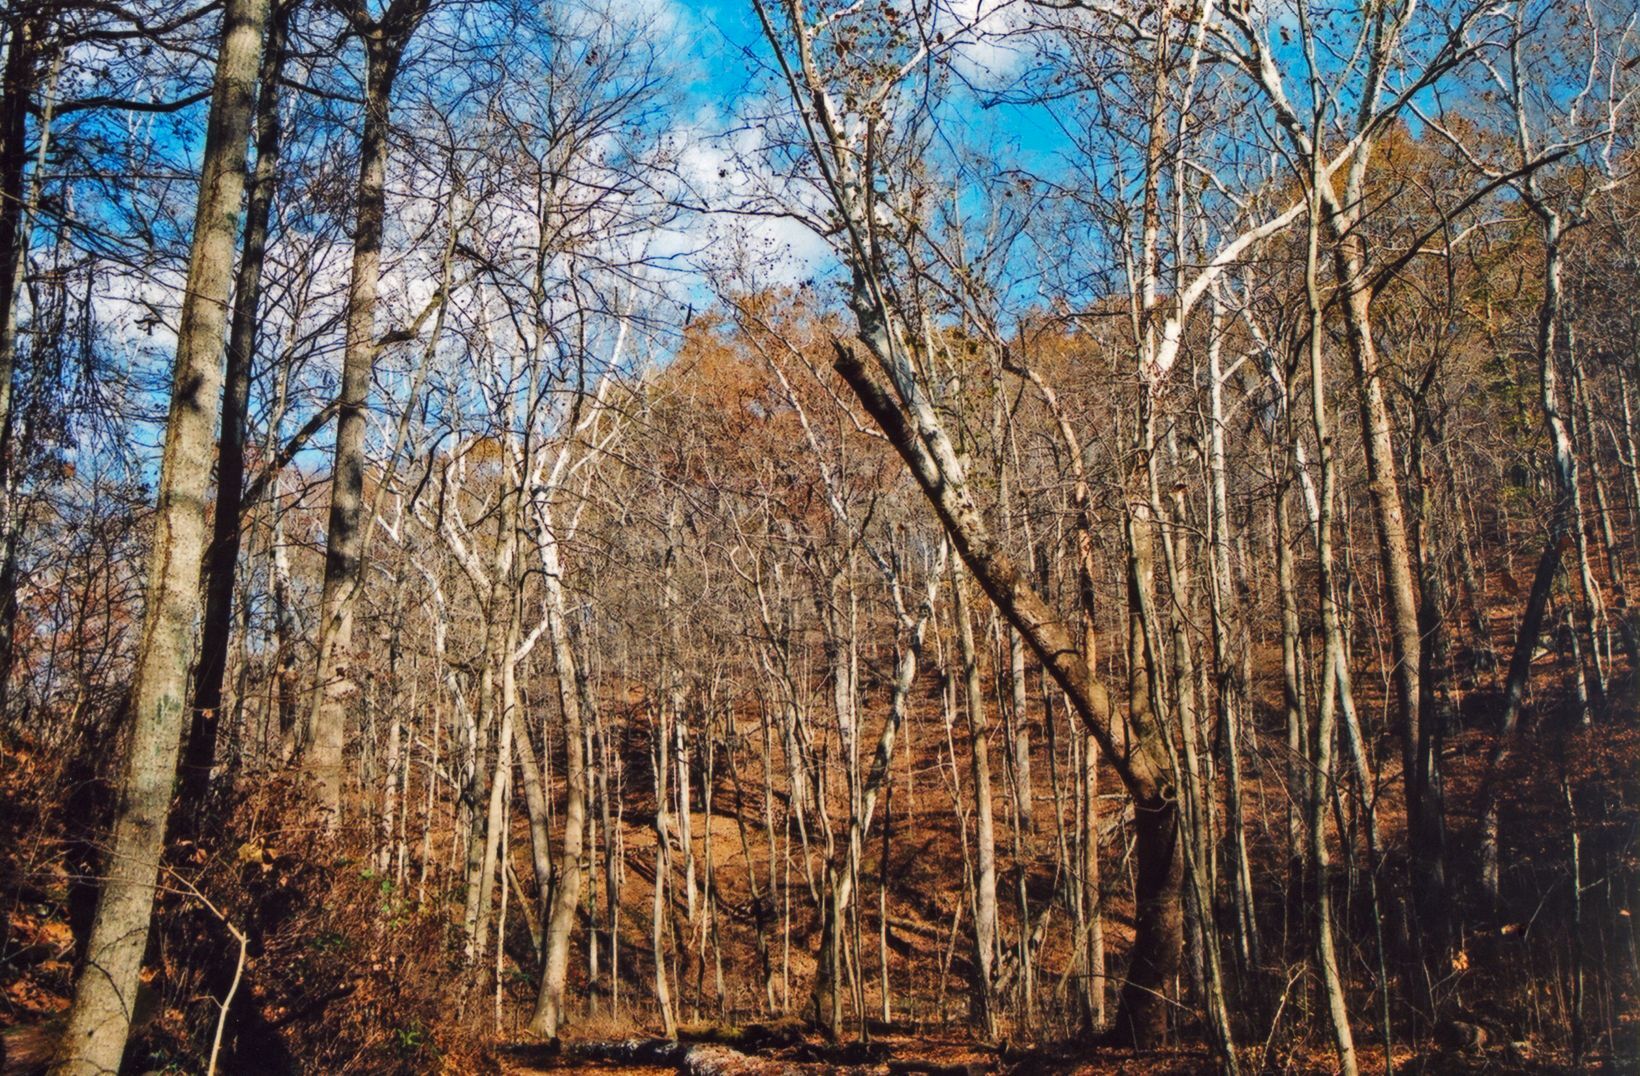 Indiana forest in November